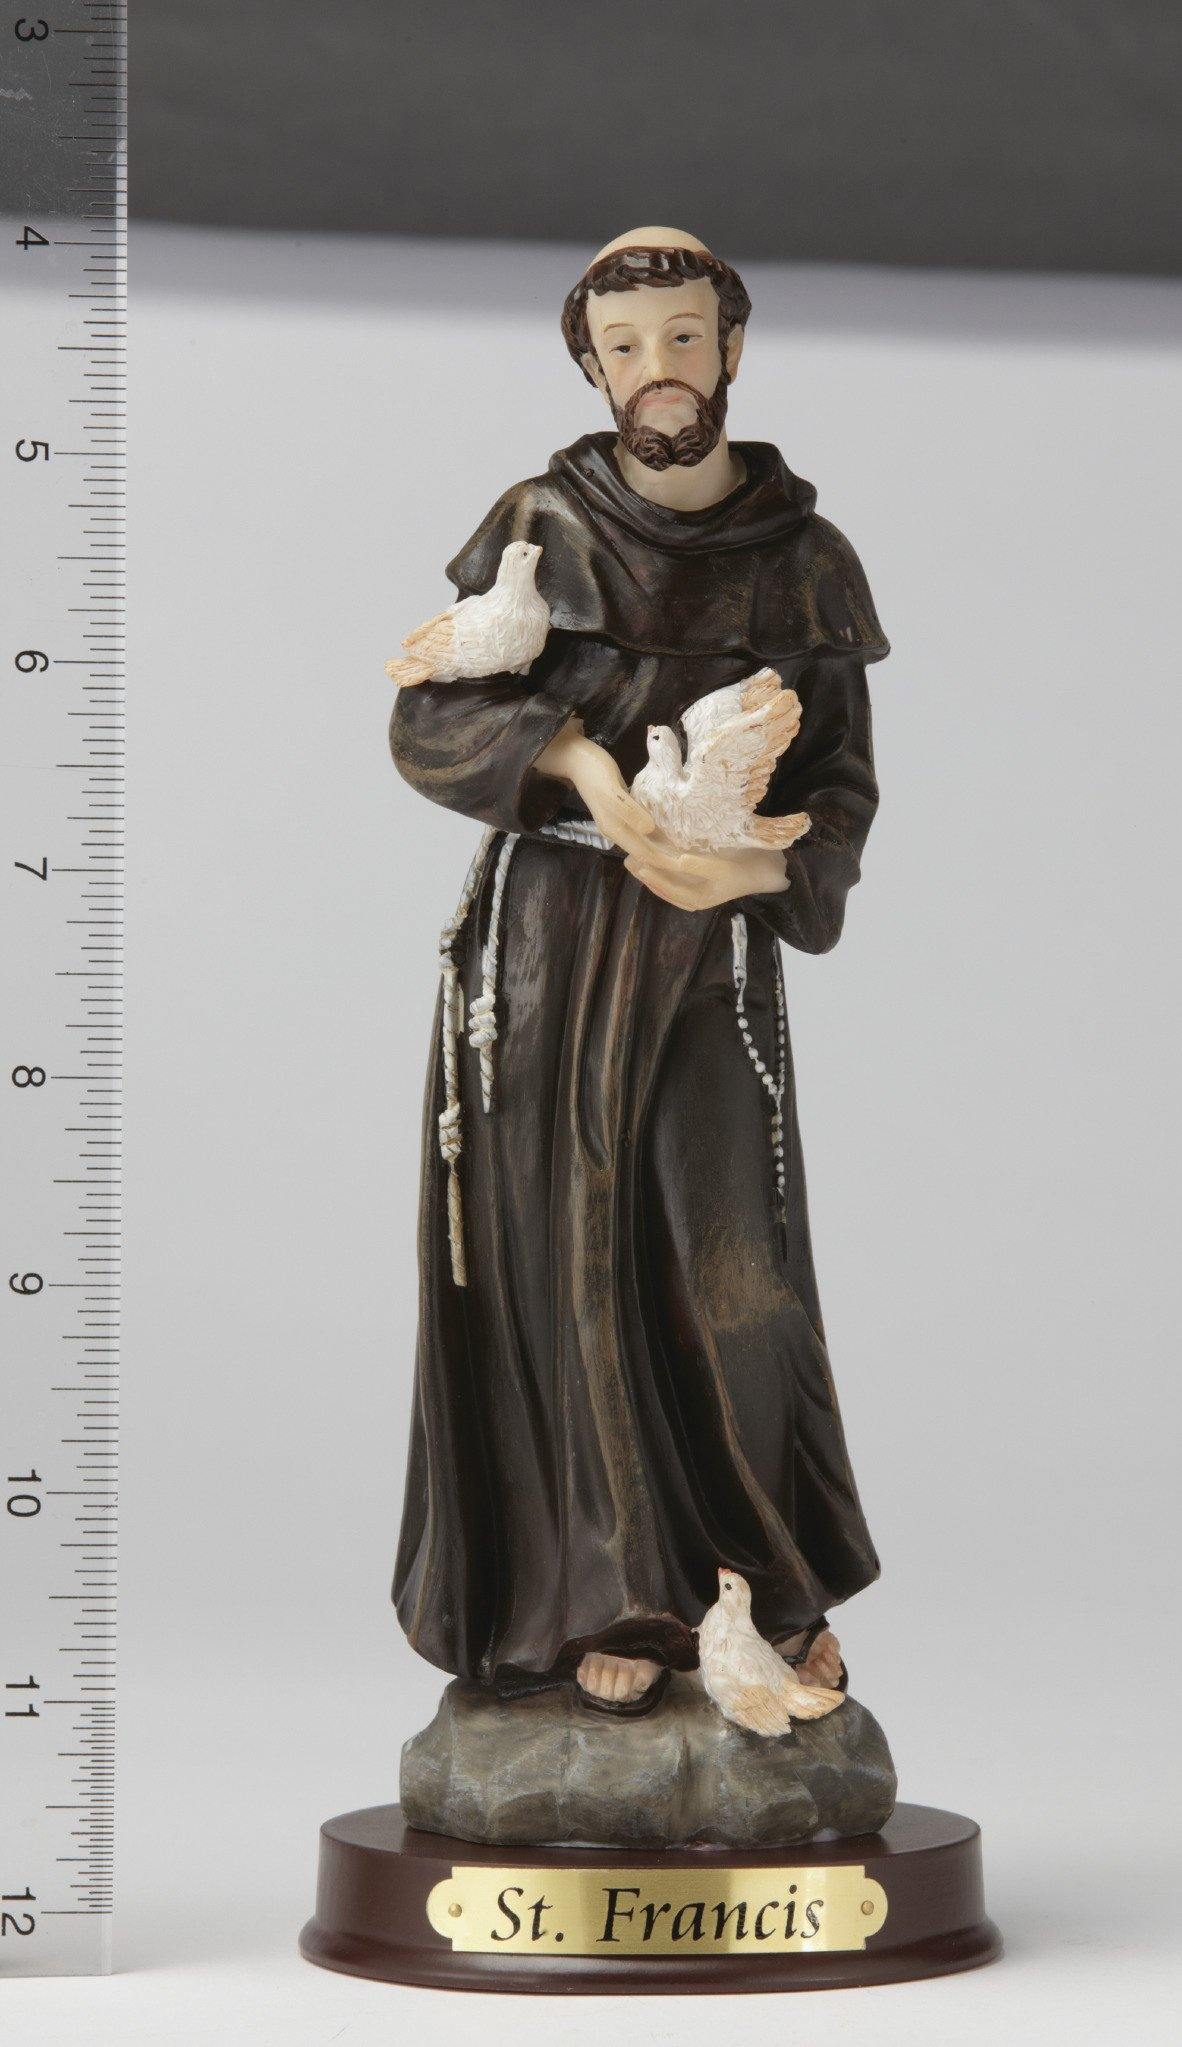 8" St. Francis Statue - Hand Painted - Religious Art - Chiarelli's Religious Goods & Church Supply